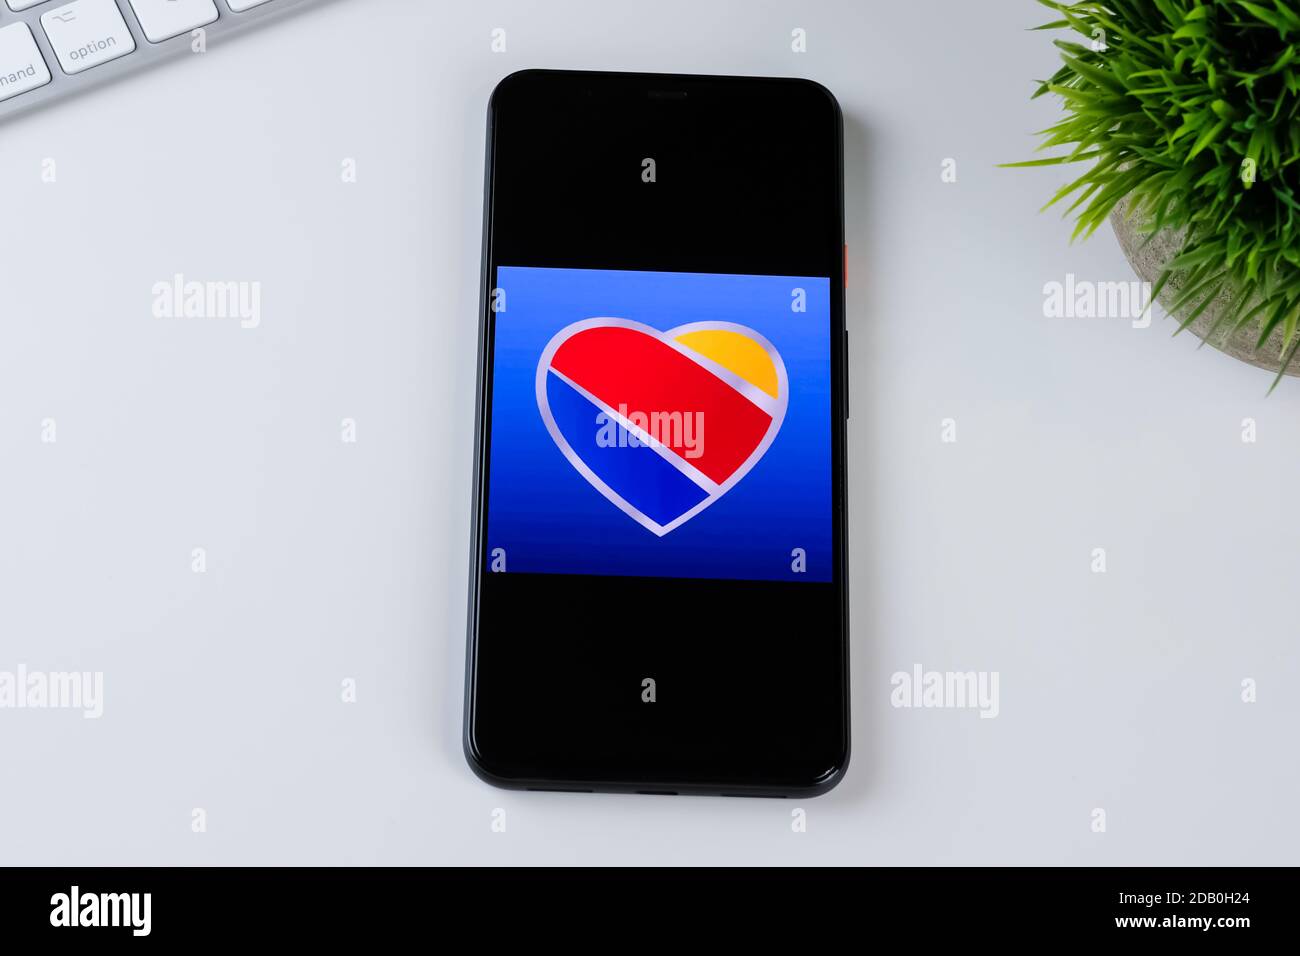 Southwest Airlines app logo on a smartphone screen. Stock Photo